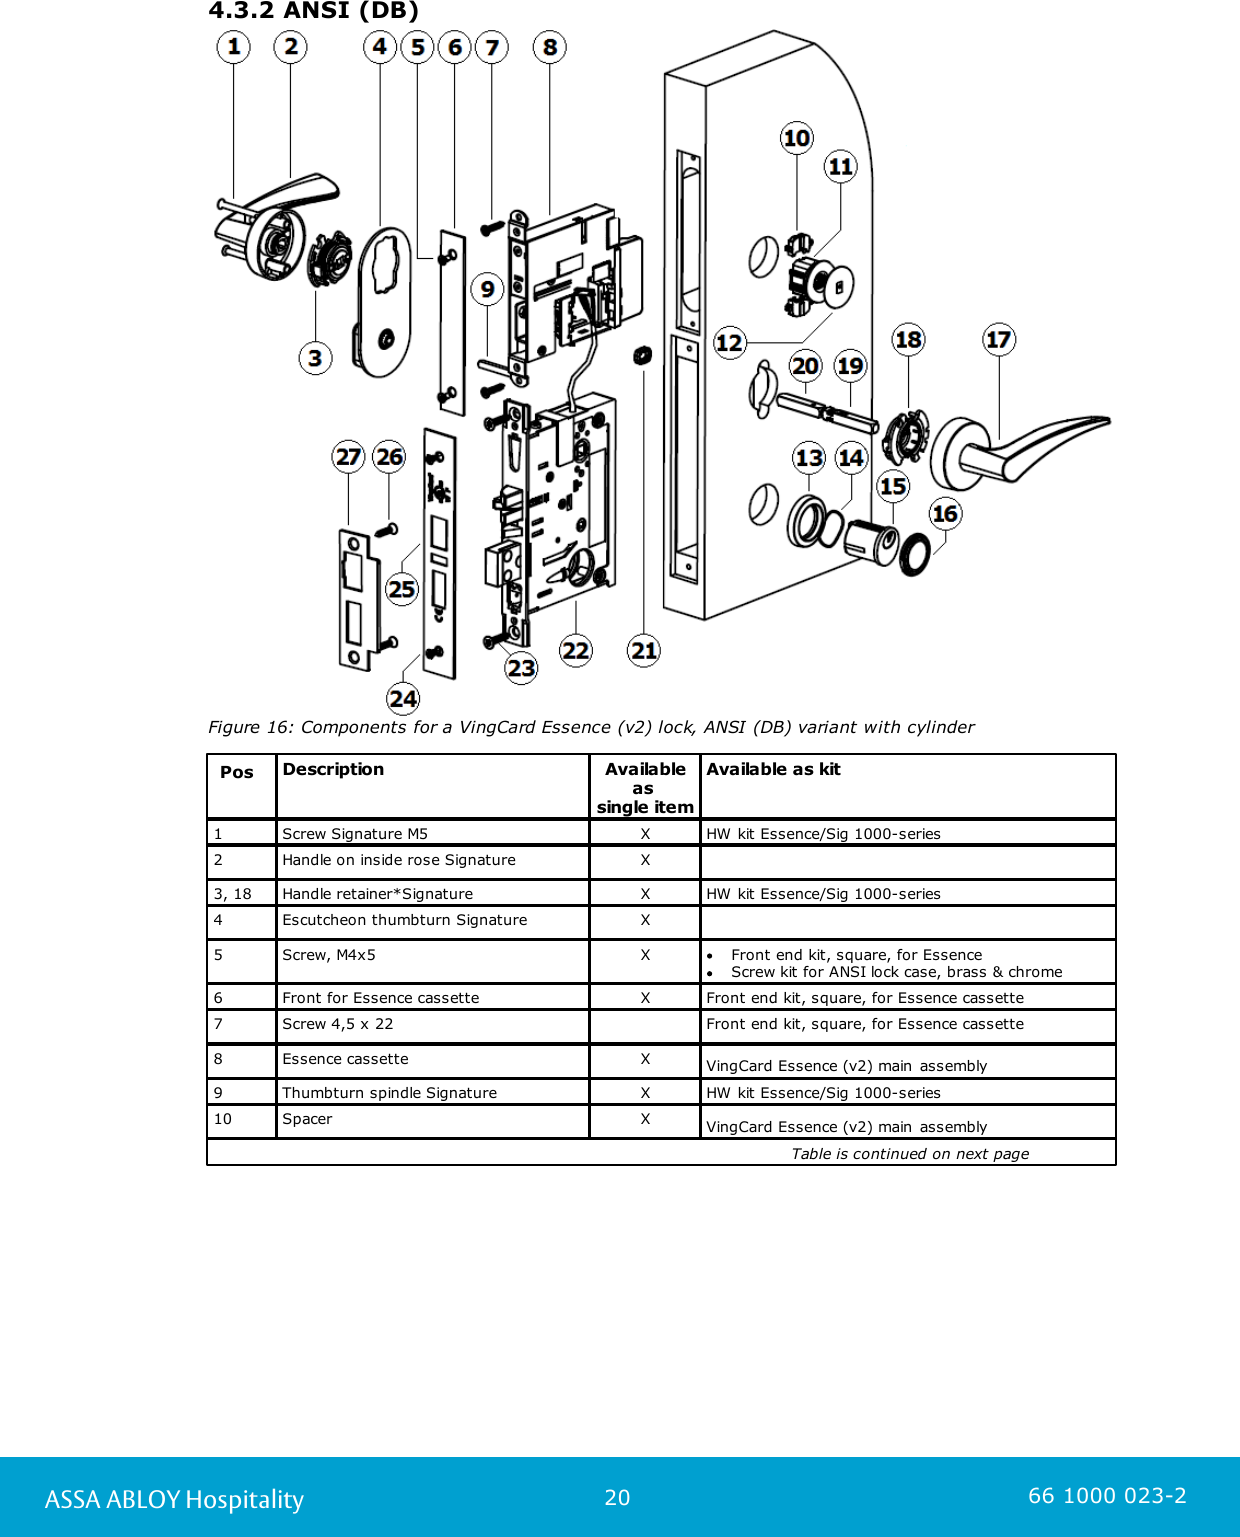 20ASSA ABLOY Hospitality 66 1000 023-24.3.2 ANSI (DB)Figure 16: Components for a VingCard Essence (v2) lock, ANSI (DB) variant with cylinder PosDescriptionAvailableas single itemAvailable as kit1Screw Signature M5 XHW kit Essence/Sig 1000-series2Handle on inside rose Signature X3, 18Handle retainer*Signature XHW kit Essence/Sig 1000-series4Escutcheon thumbturn SignatureX5Screw, M4x5XFront end kit, square, for Essence Screw kit for ANSI lock case, brass &amp; chrome6Front for Essence cassetteXFront end kit, square, for Essence cassette7Screw 4,5 x 22Front end kit, square, for Essence cassette8Essence cassette XVingCard Essence (v2) main assembly9Thumbturn spindle SignatureXHW kit Essence/Sig 1000-series10SpacerXVingCard Essence (v2) main assembly                                                                                                               Table is continued on next page